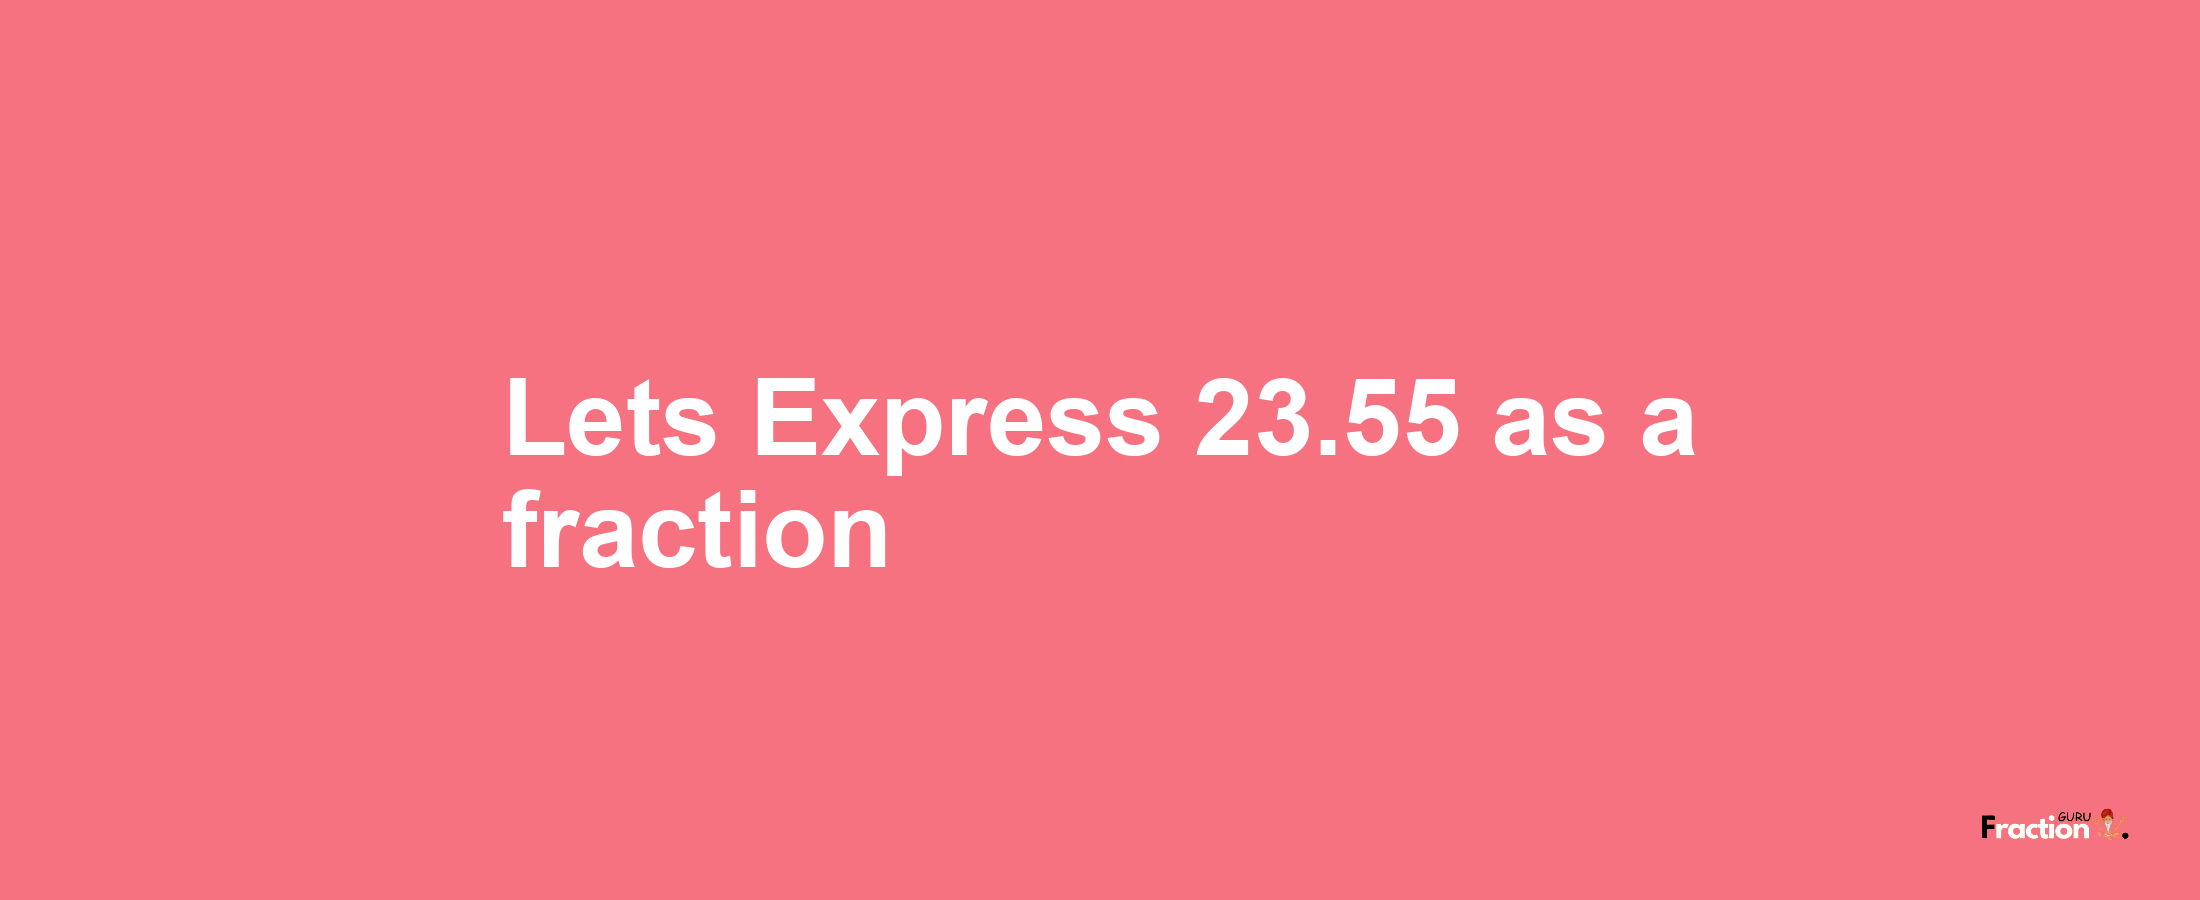 Lets Express 23.55 as afraction